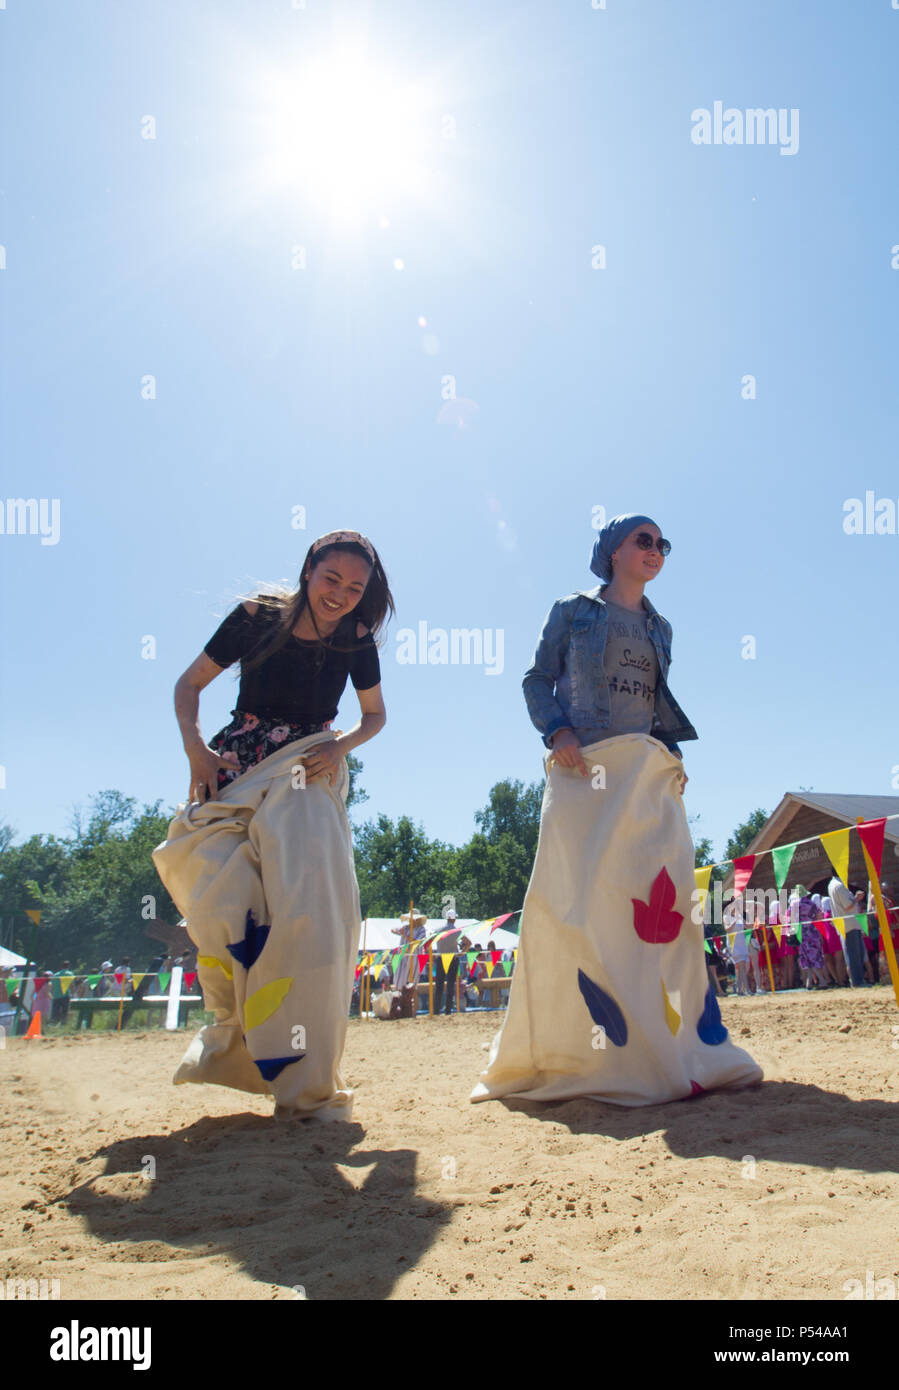 KAZAN, RUSSIA - JUNE 23, 2018: Traditional Tatar festival Sabantuy - Young women having fun playing traditional game, jumps in bags under the sun Stock Photo